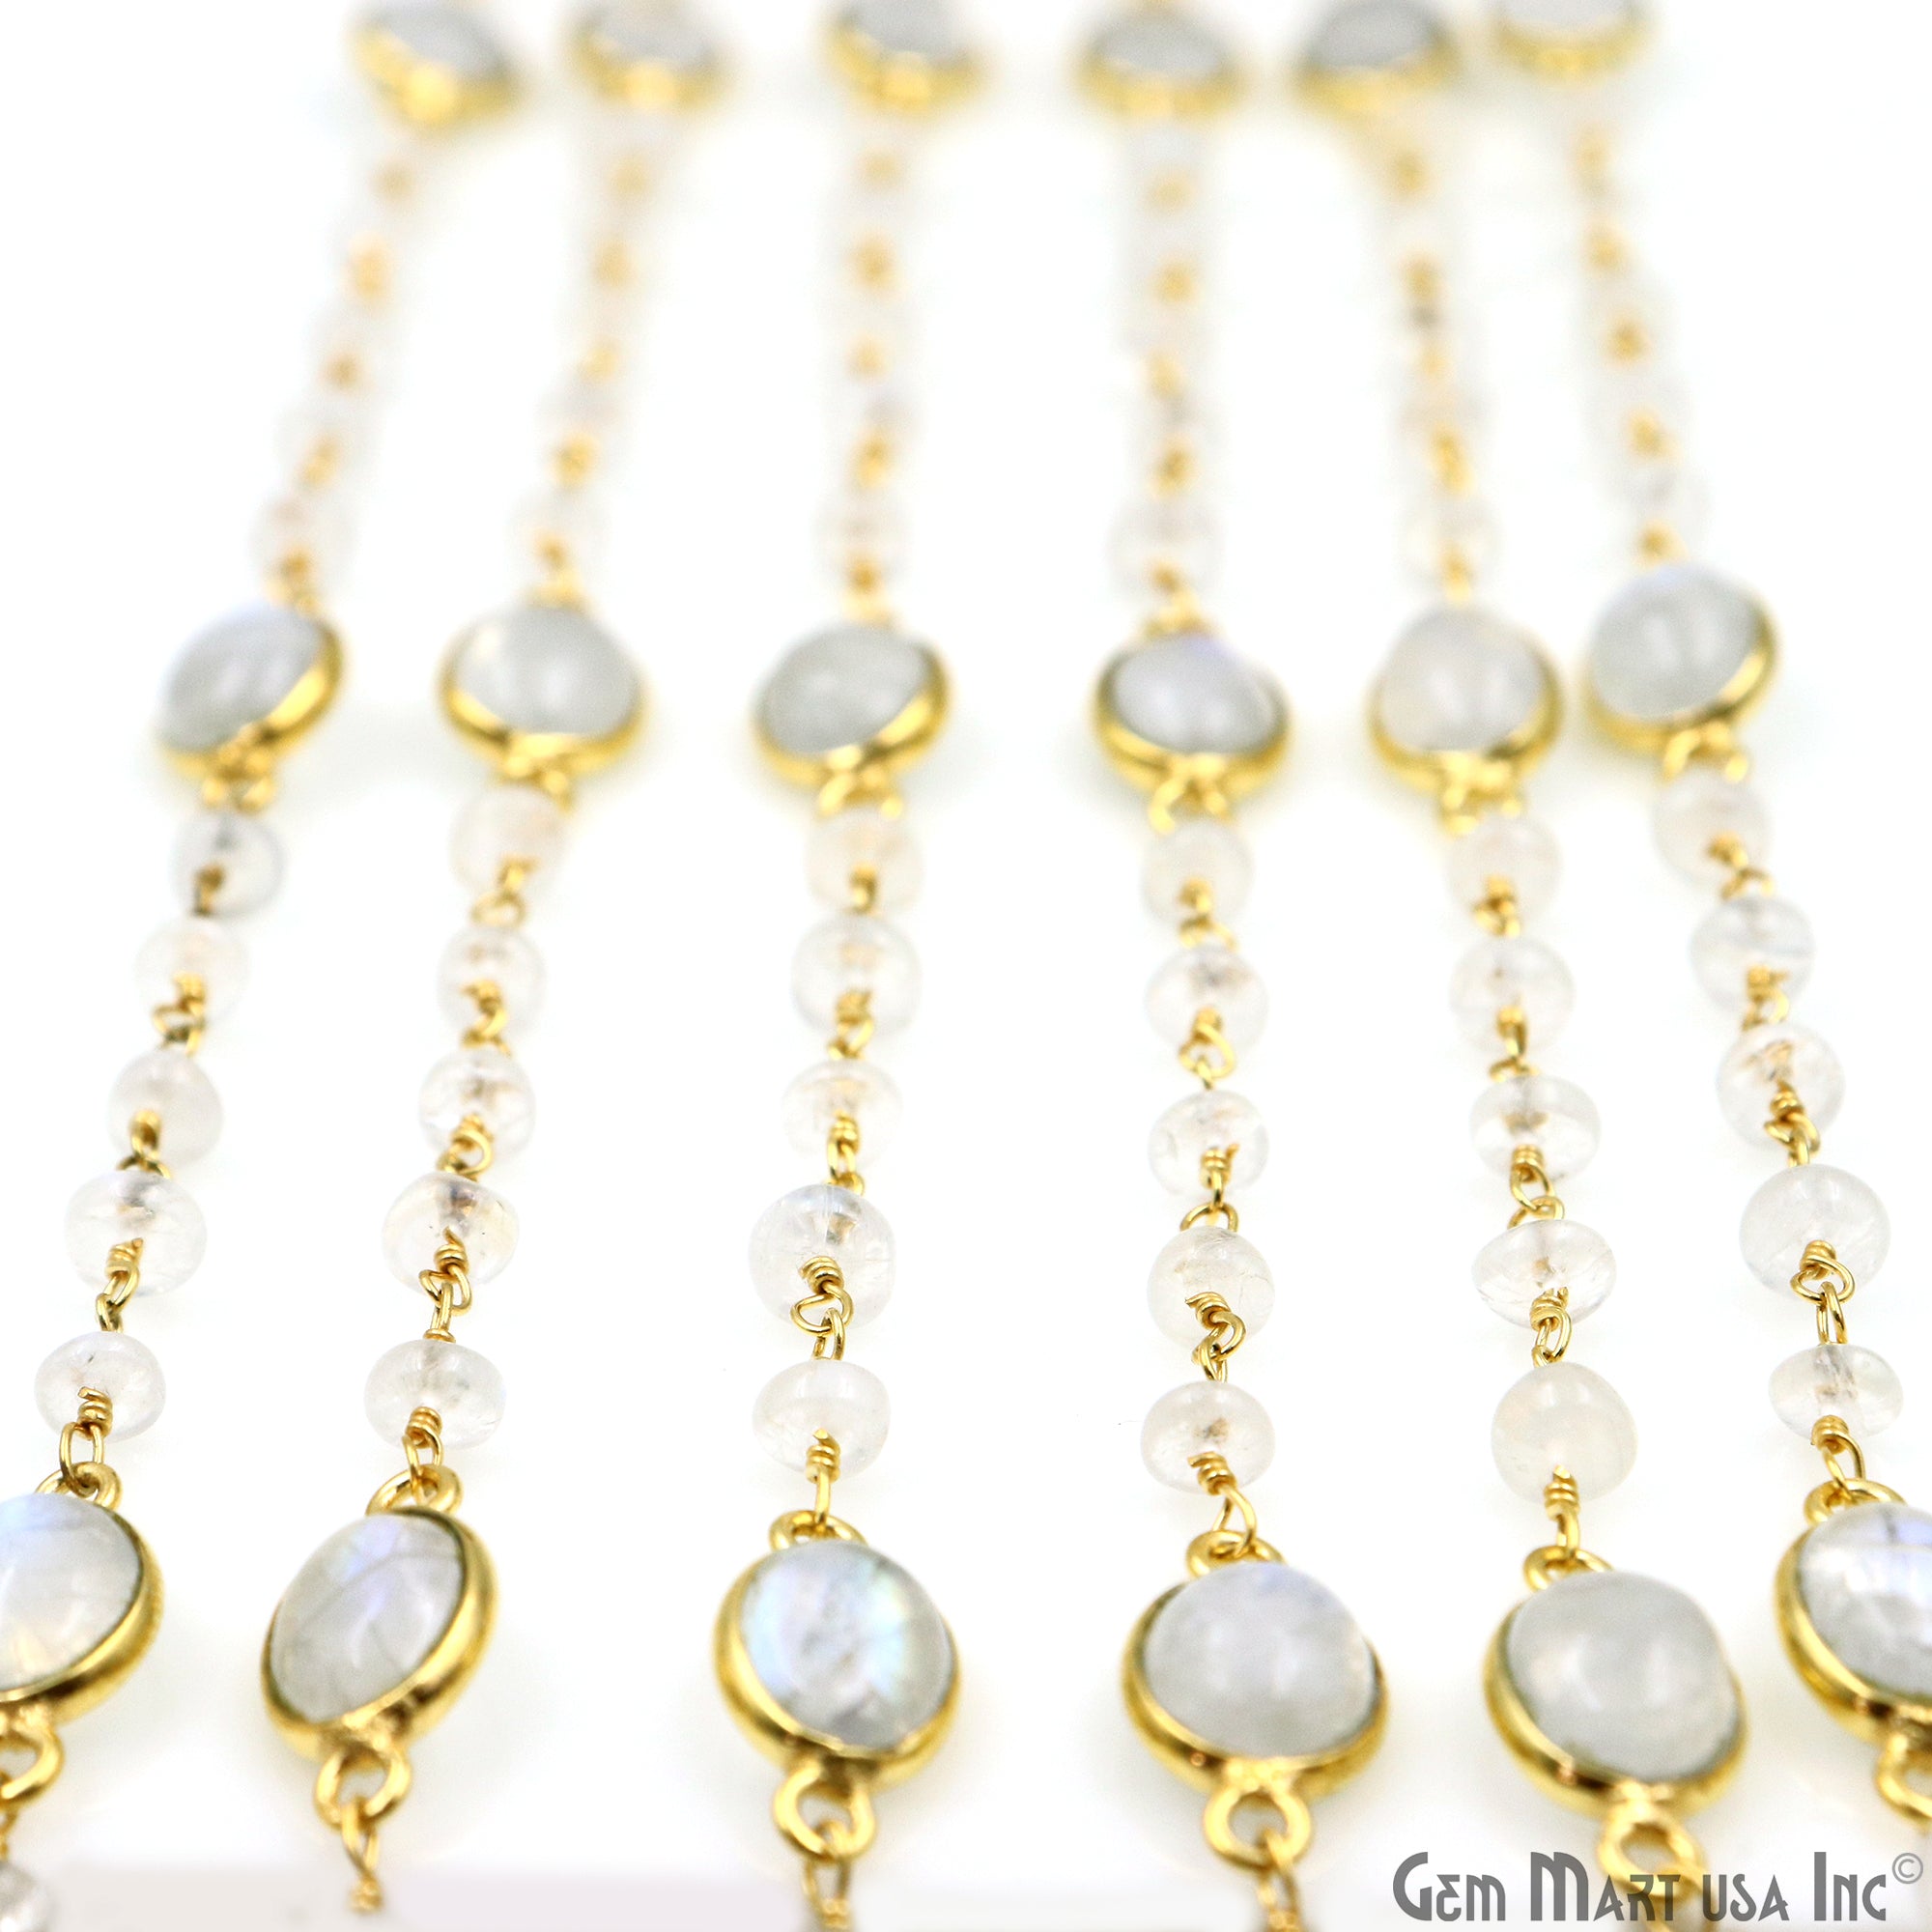 Rainbow Moonstone Beads & Bezel Connector Gold Plated Rosary Chain